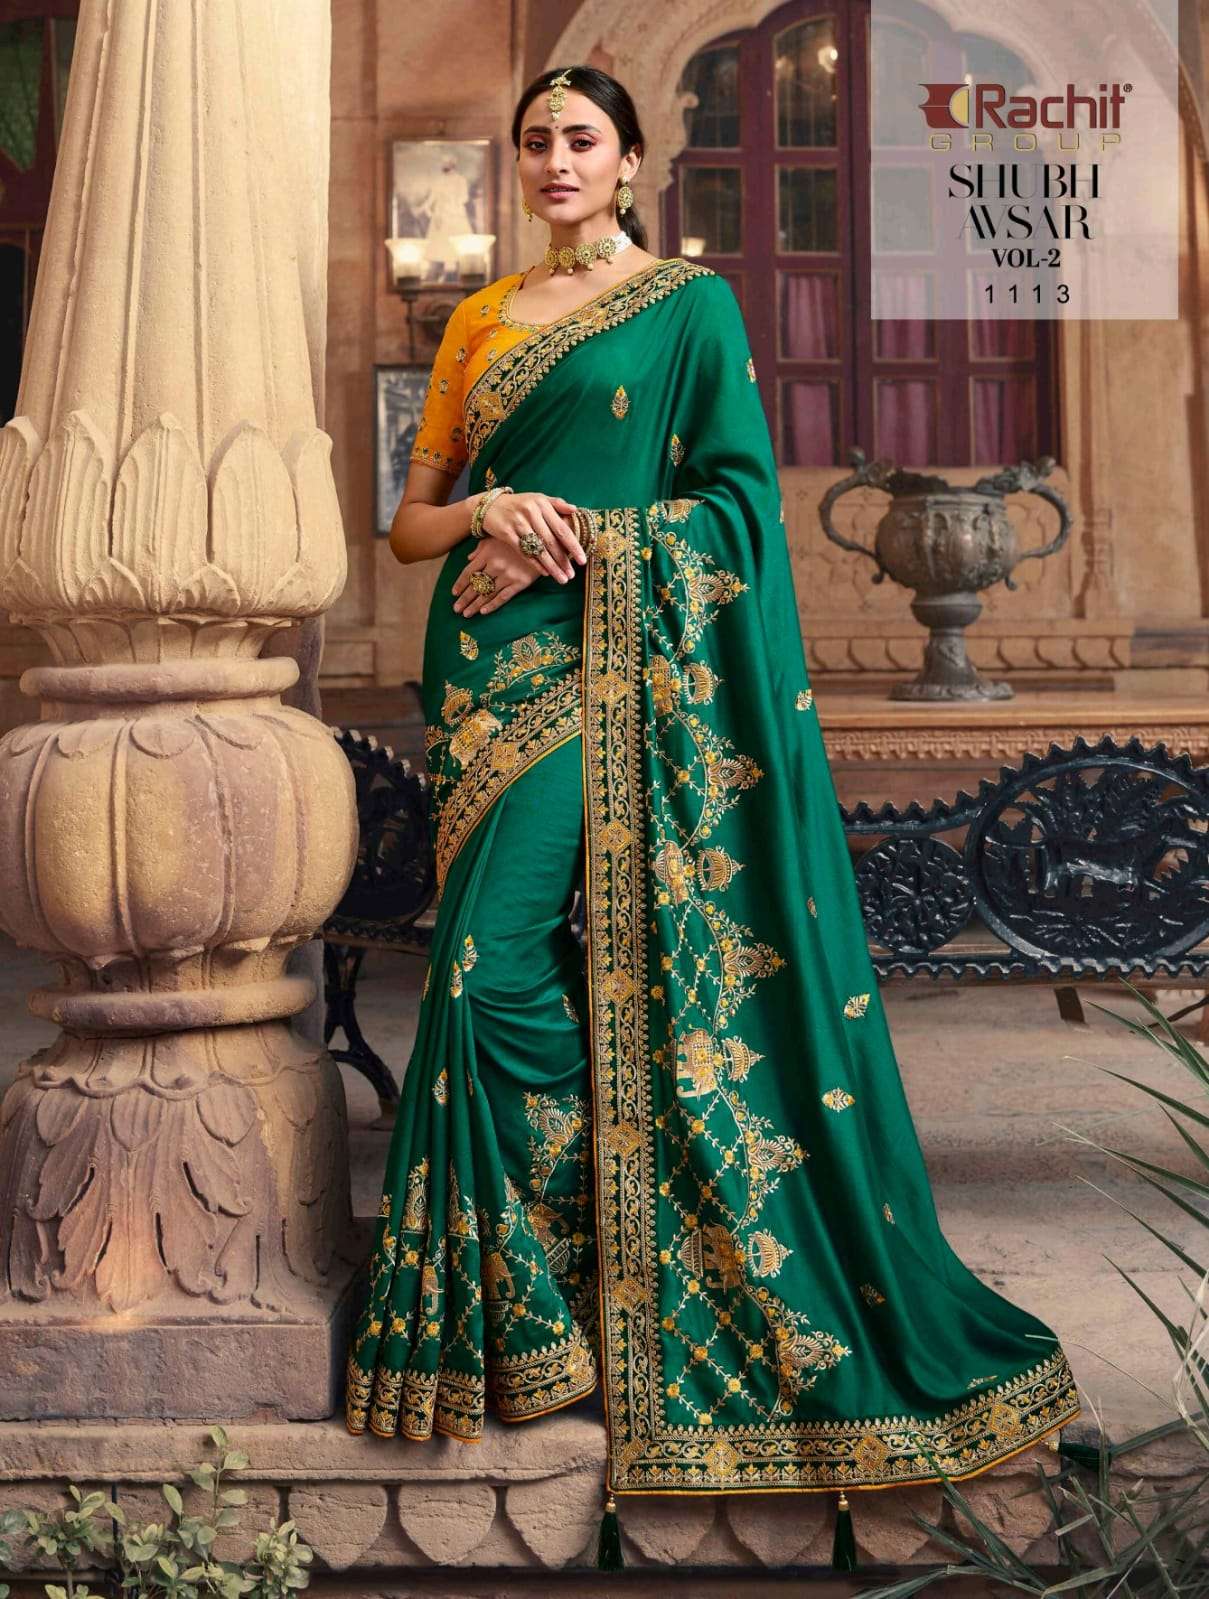 SHUBH AVSAR VOL-2 BY RACHIT 1101 TO 1114 SERIES COLORFUL BEAUTIFUL FANCY PARTY WEAR & TRADITIONAL WEAR FANCY SAREES AT WHOLESALE PRICE